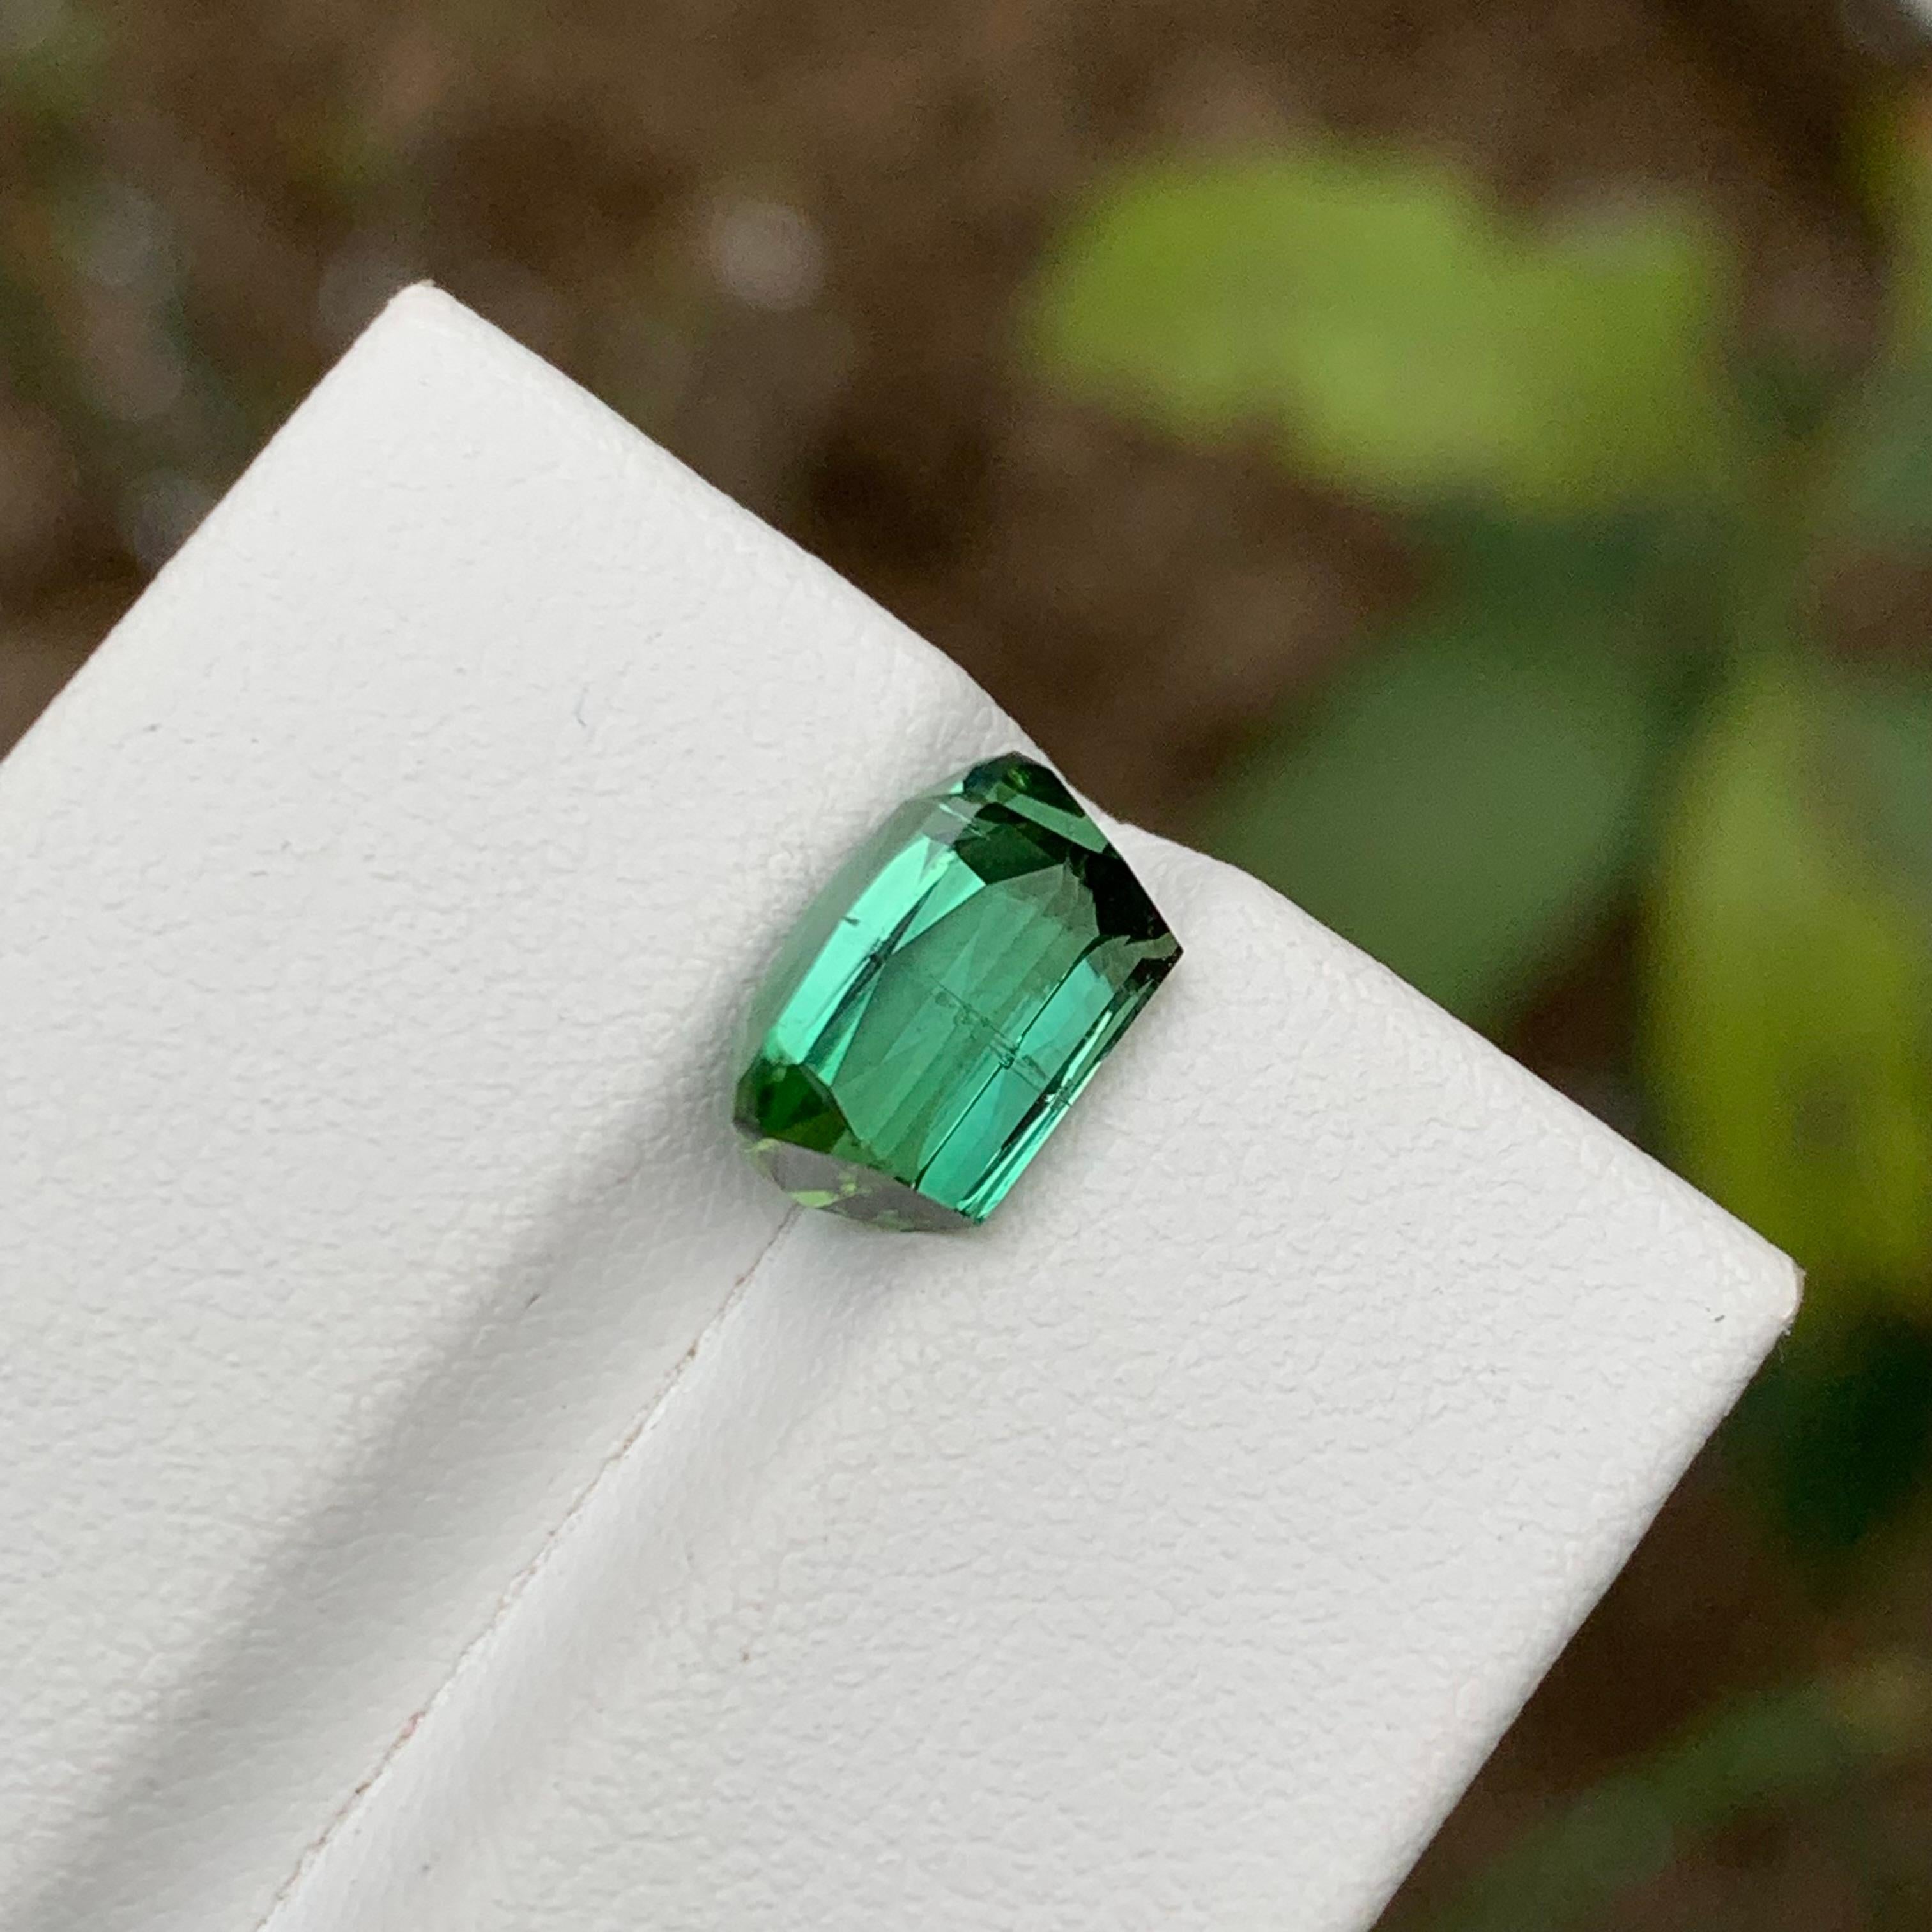 Rare Mint Green Natural Tourmaline Gemstone, 3.85 Ct Cushion Cut-Ring/Jewelry  For Sale 1